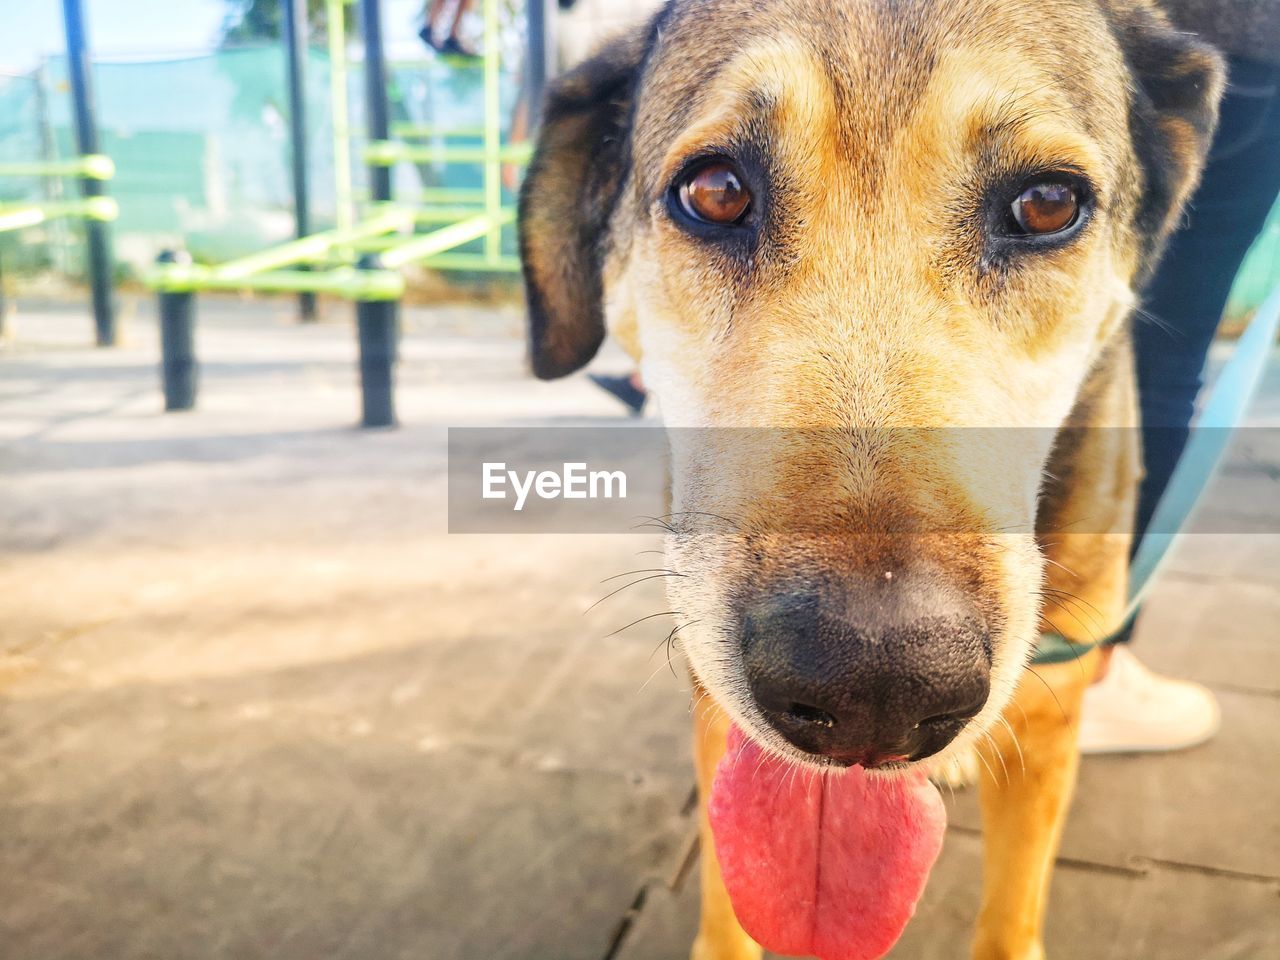 pet, one animal, dog, canine, domestic animals, animal, animal themes, mammal, portrait, looking at camera, day, focus on foreground, close-up, animal body part, no people, sunlight, animal shelter, outdoors, sticking out tongue, puppy, animal head